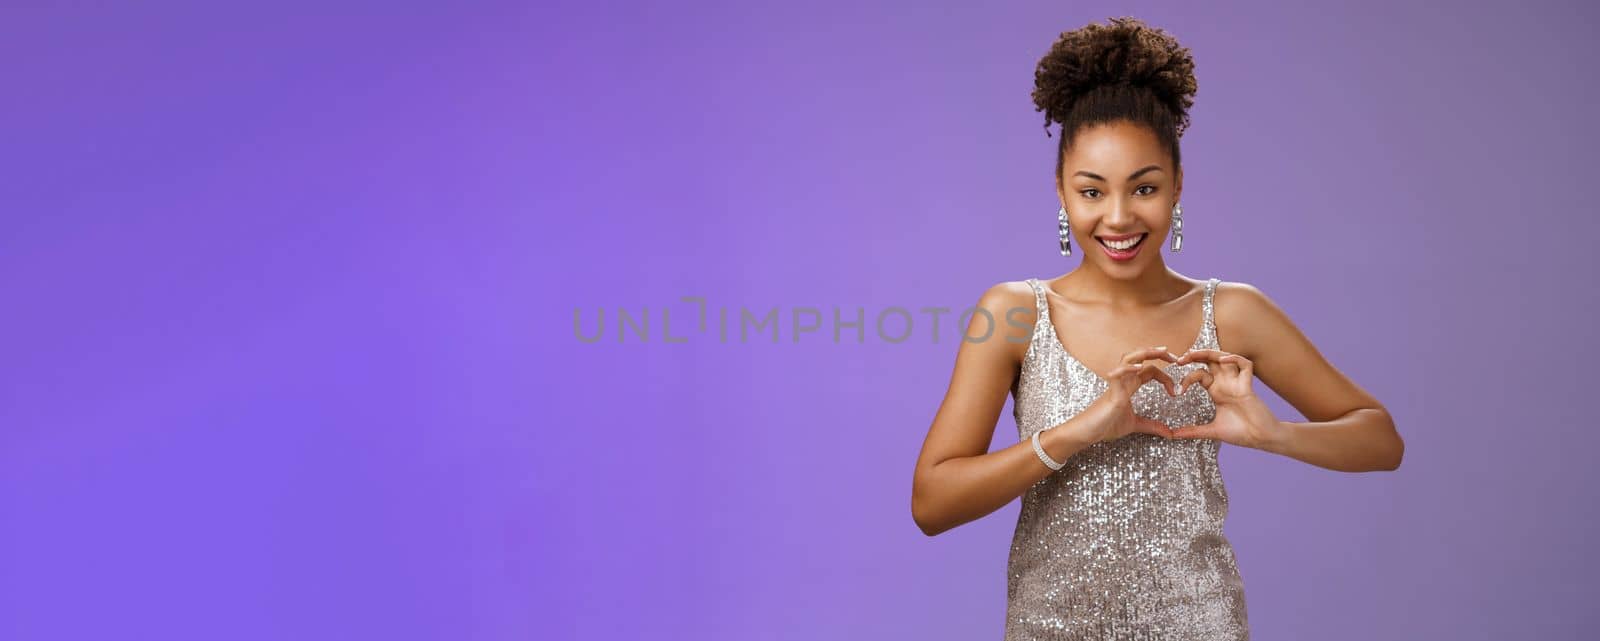 Girl totally loved adores look grateful deisgners. peek elegant dress b-day party show heart gesture smiling happily expressing love heartwarming passionate feelings standing gladly blue background.